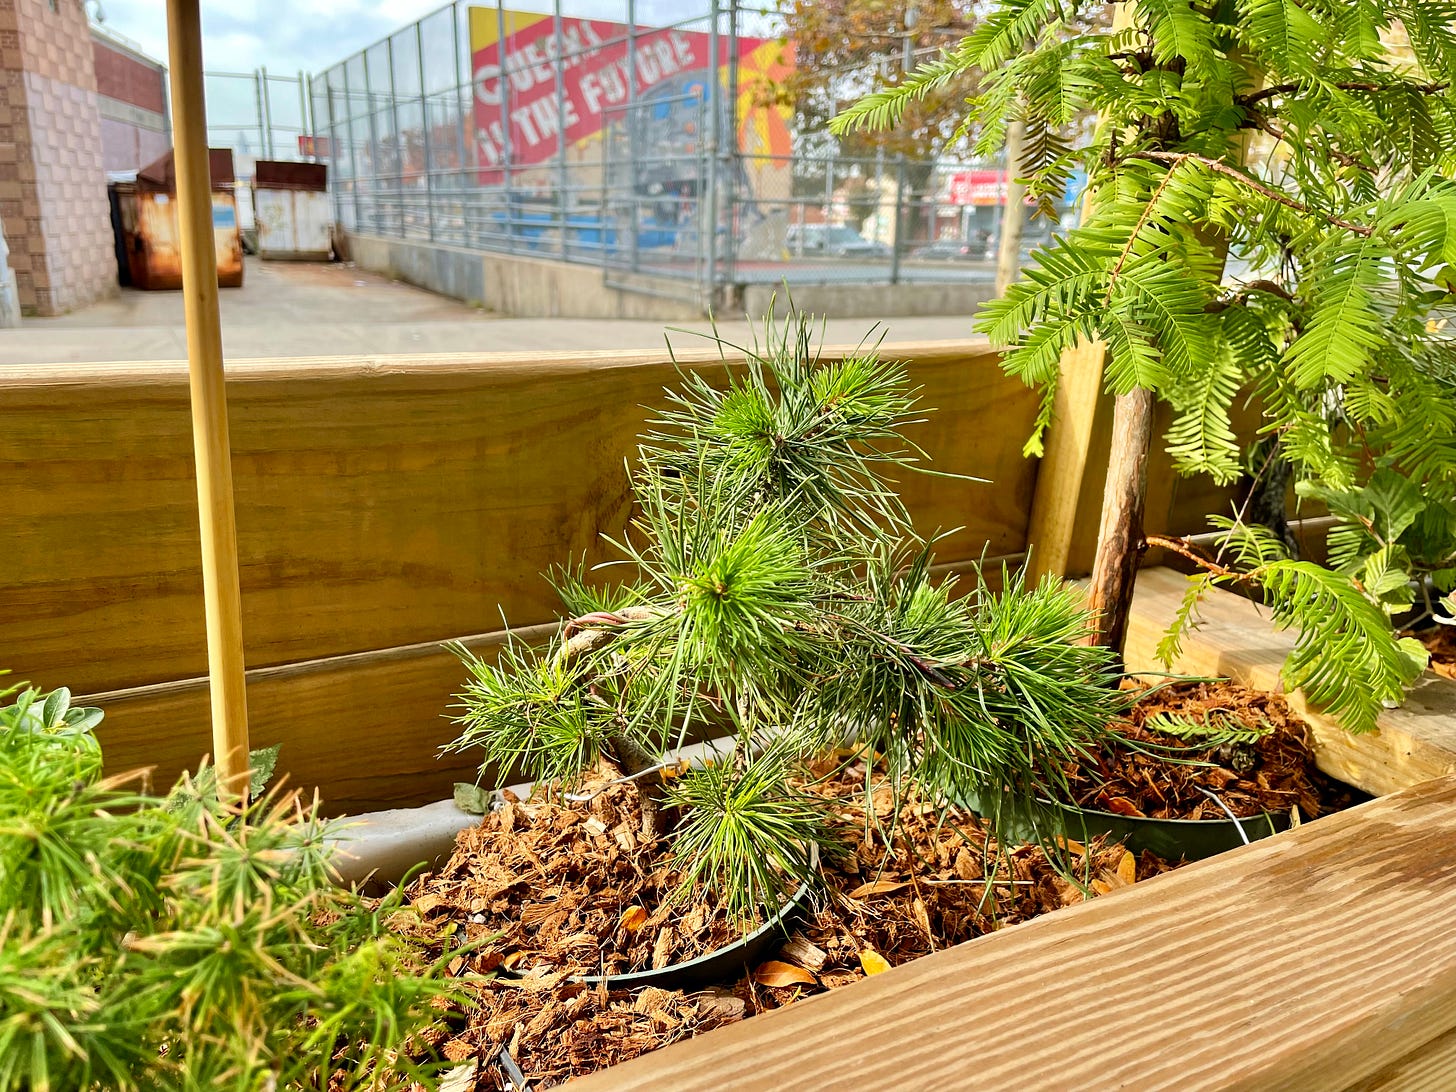 Image description: Photo of my Scots pine mulched into the planter. QUEENS IS THE FUTURE mural helpfully in the background. End image description.